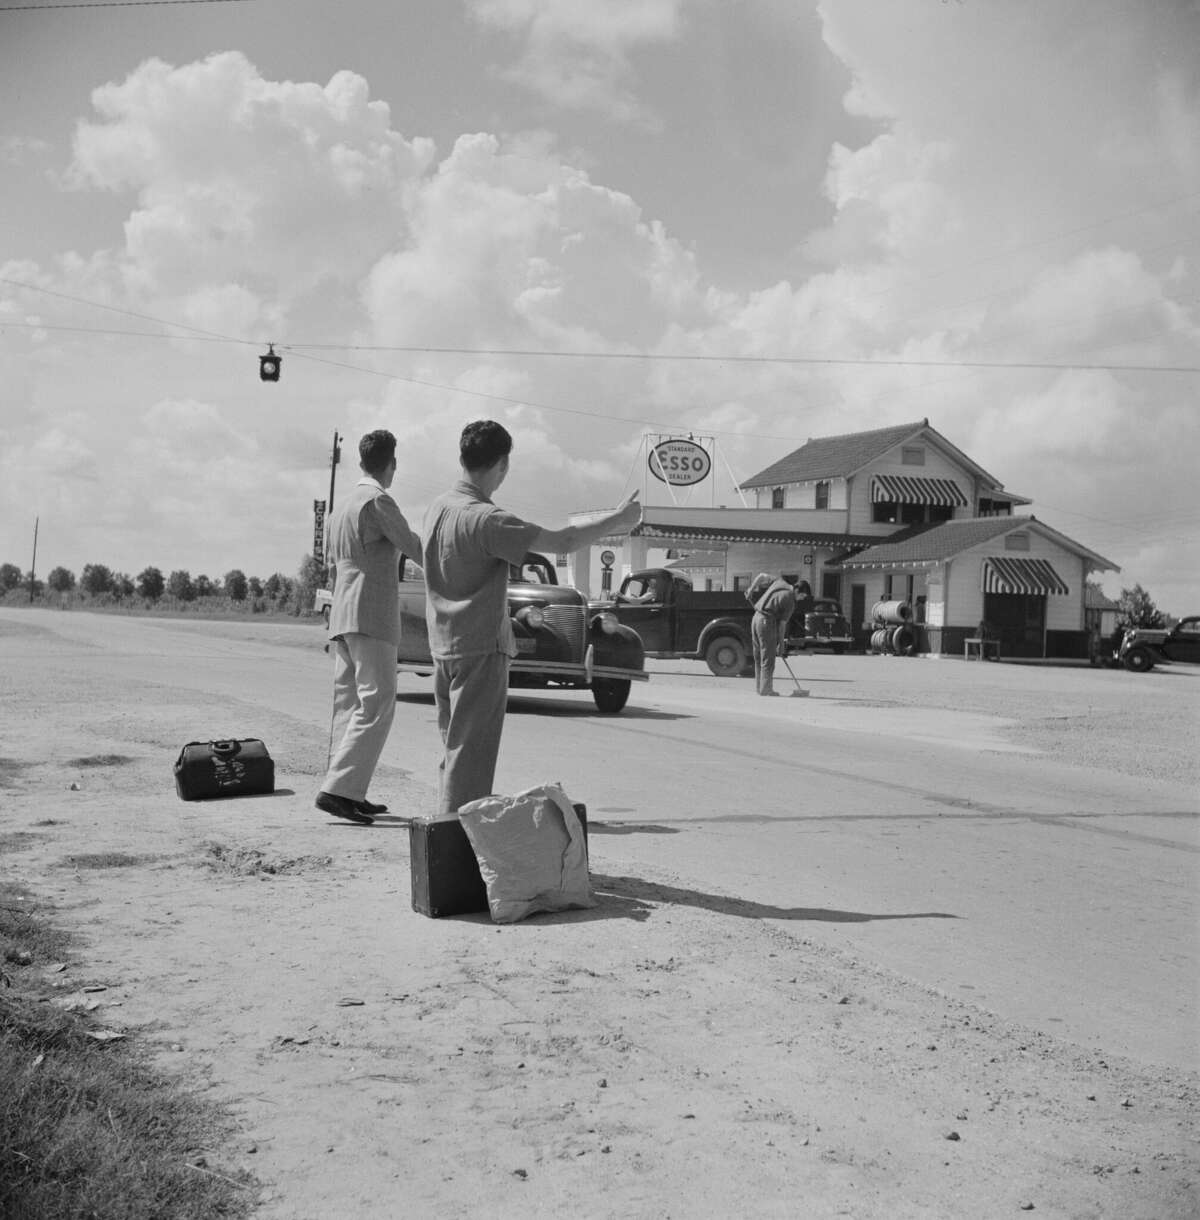 Two young men hitchhiking, near Natchitoches, Louisiana, Marion Post Wolcott for Farm Security Administration, June 1940. (Photo by: Universal History Archive/Universal Images Group via Getty Images)